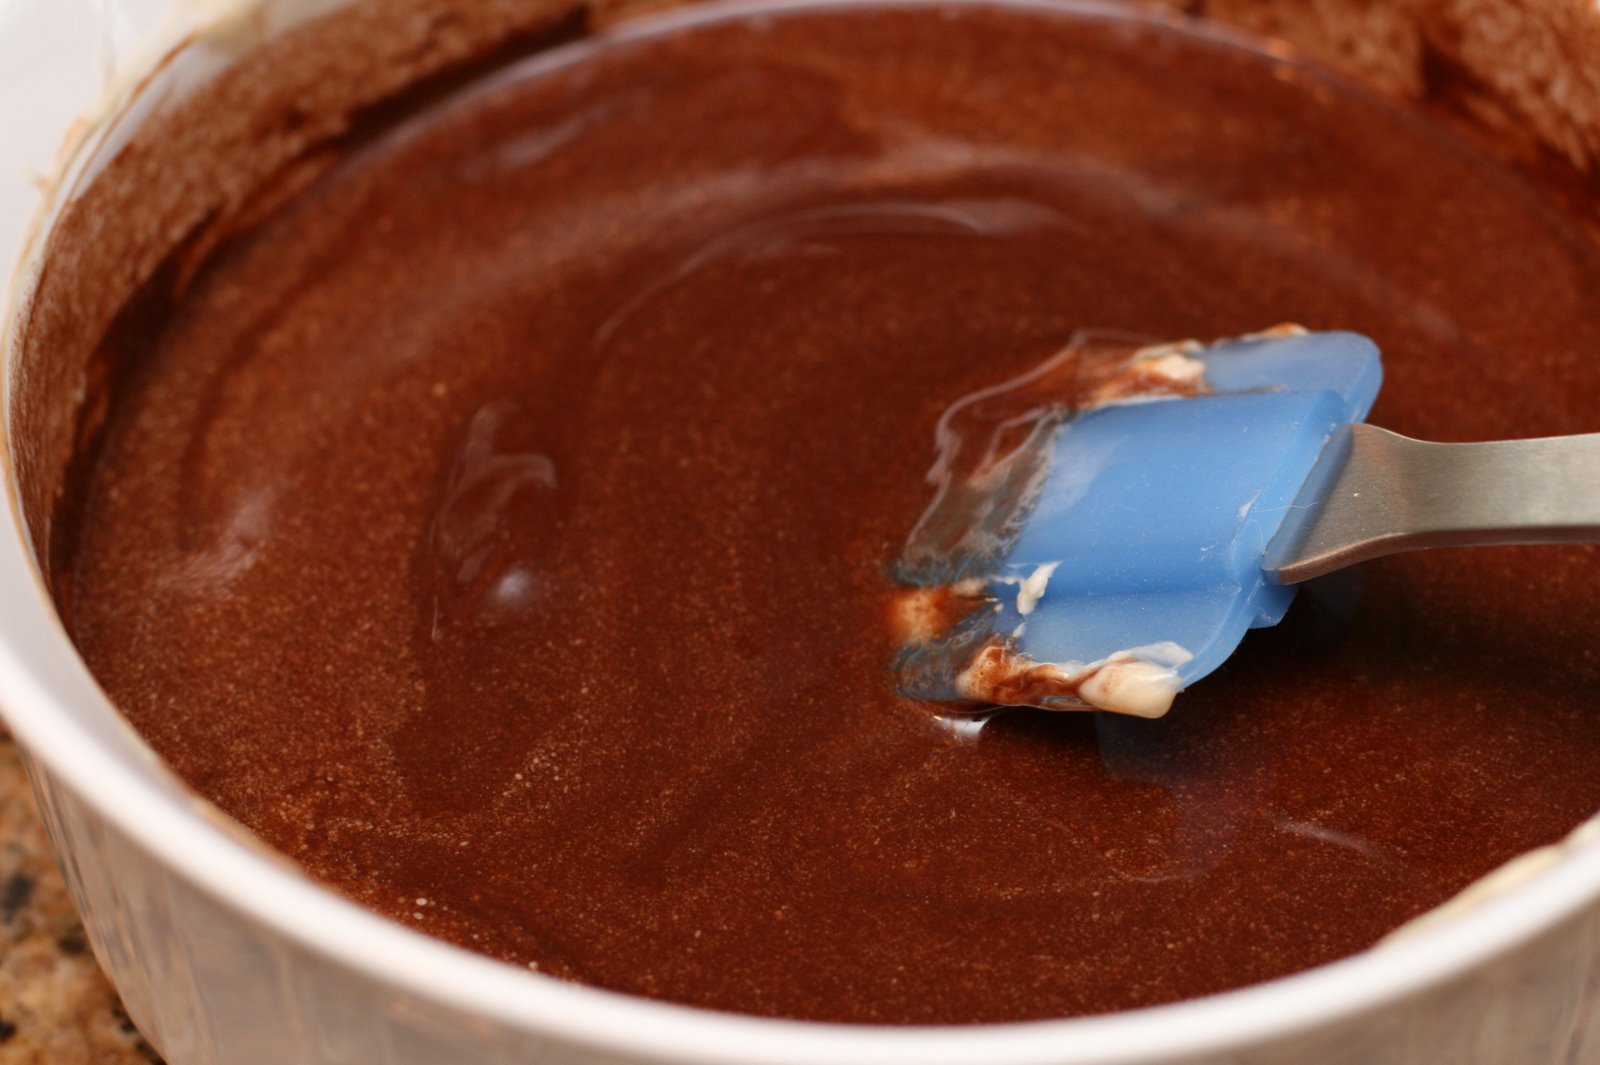 [Melted+chocolate.jpg]